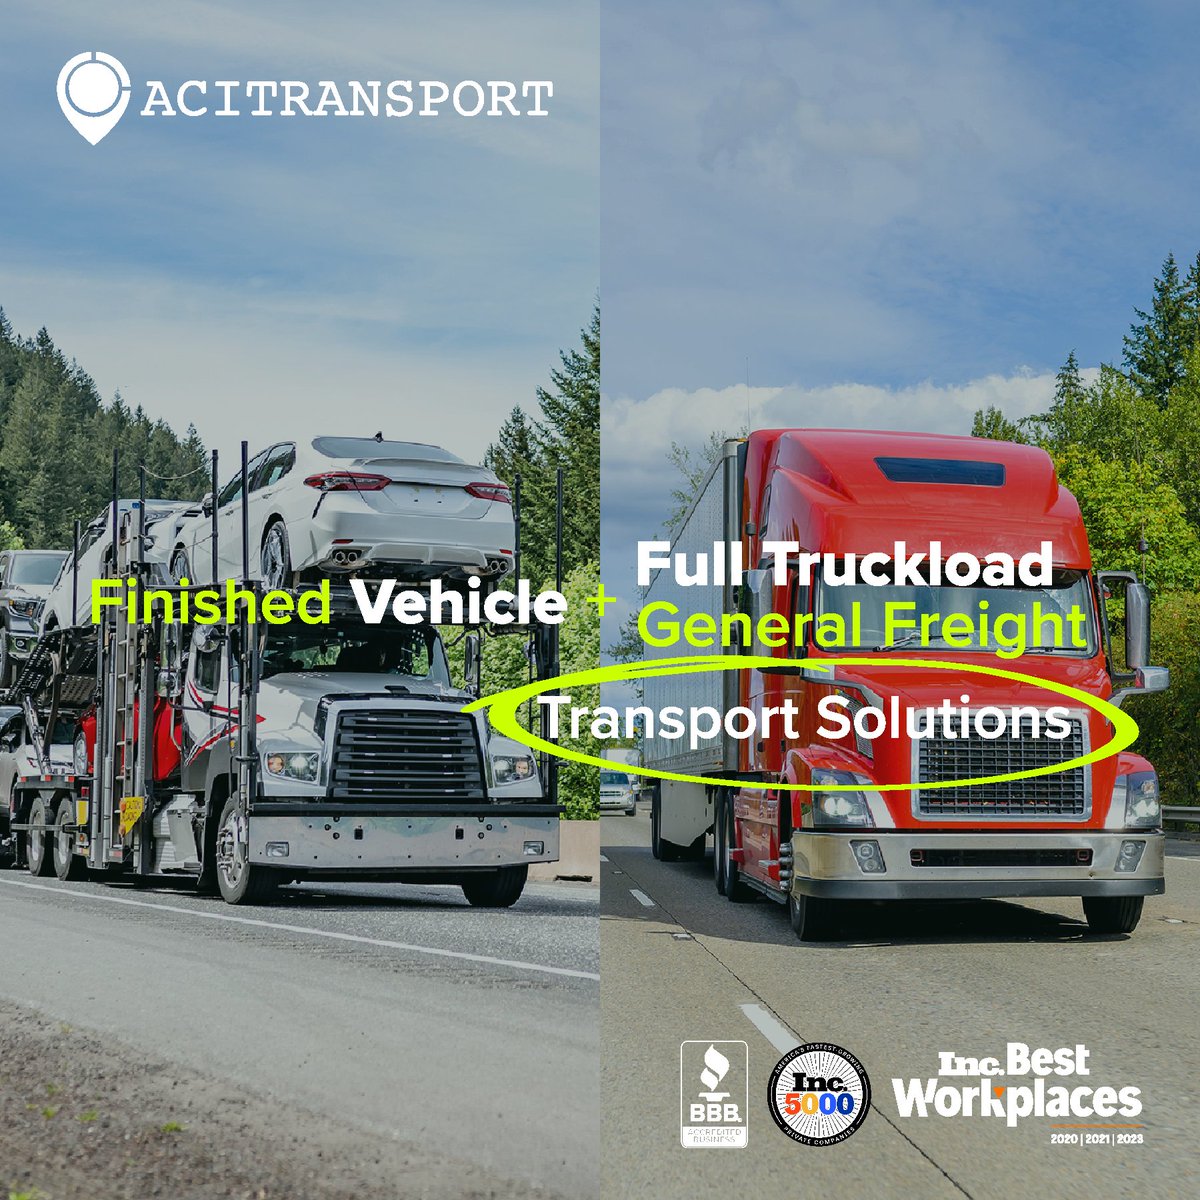 Discover seamless logistics solutions! From finished vehicles to full truckload general freight ACI Transport has you covered. Leave the heavy lifting to us while you focus on everything else. Let's connect: zurl.co/Aia0  #ACITransport #Logistics #truckloadstrong #3PL